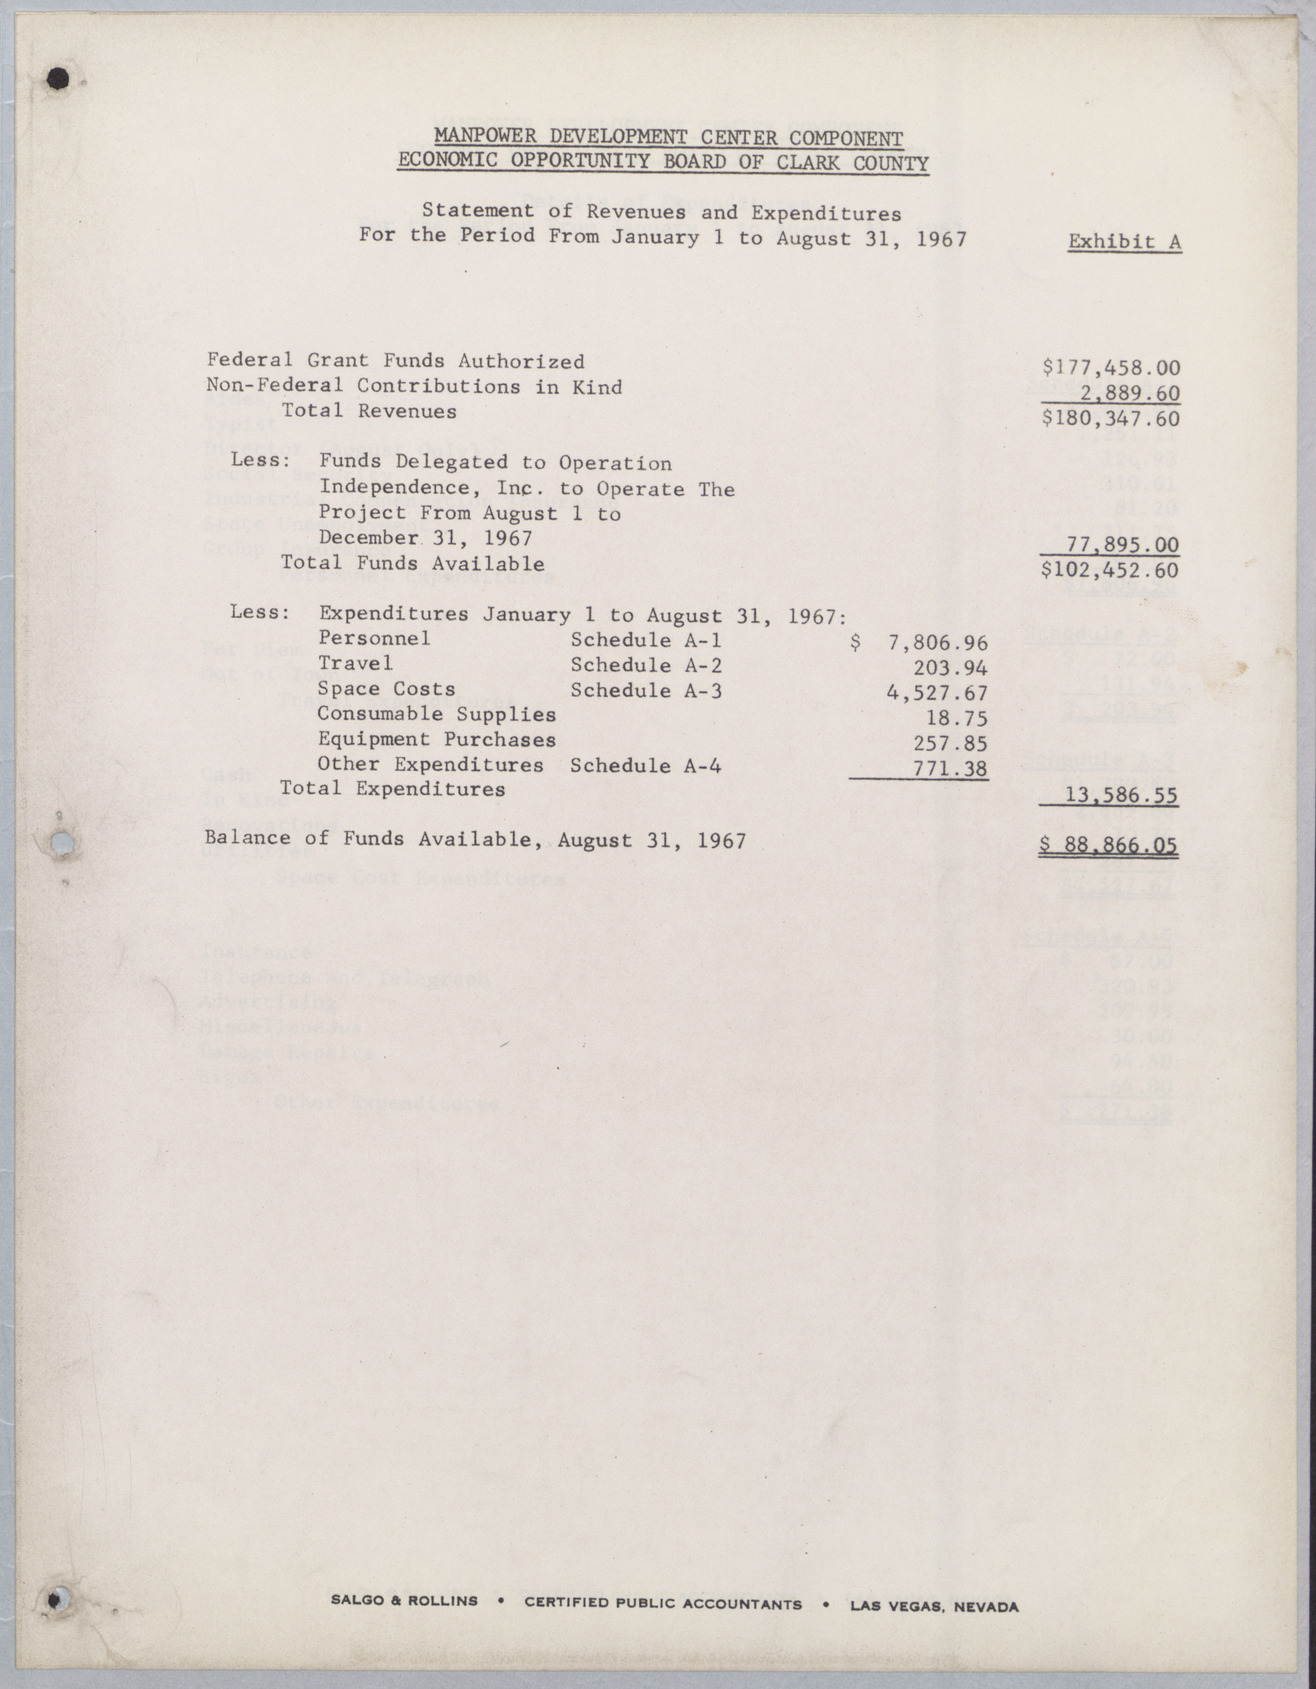 Manpower Development Center Component EOB of Clark County Report on Examination of Revenues and Expenditures for the period from January 1 to August 31, 1967 (5 pages), page 4